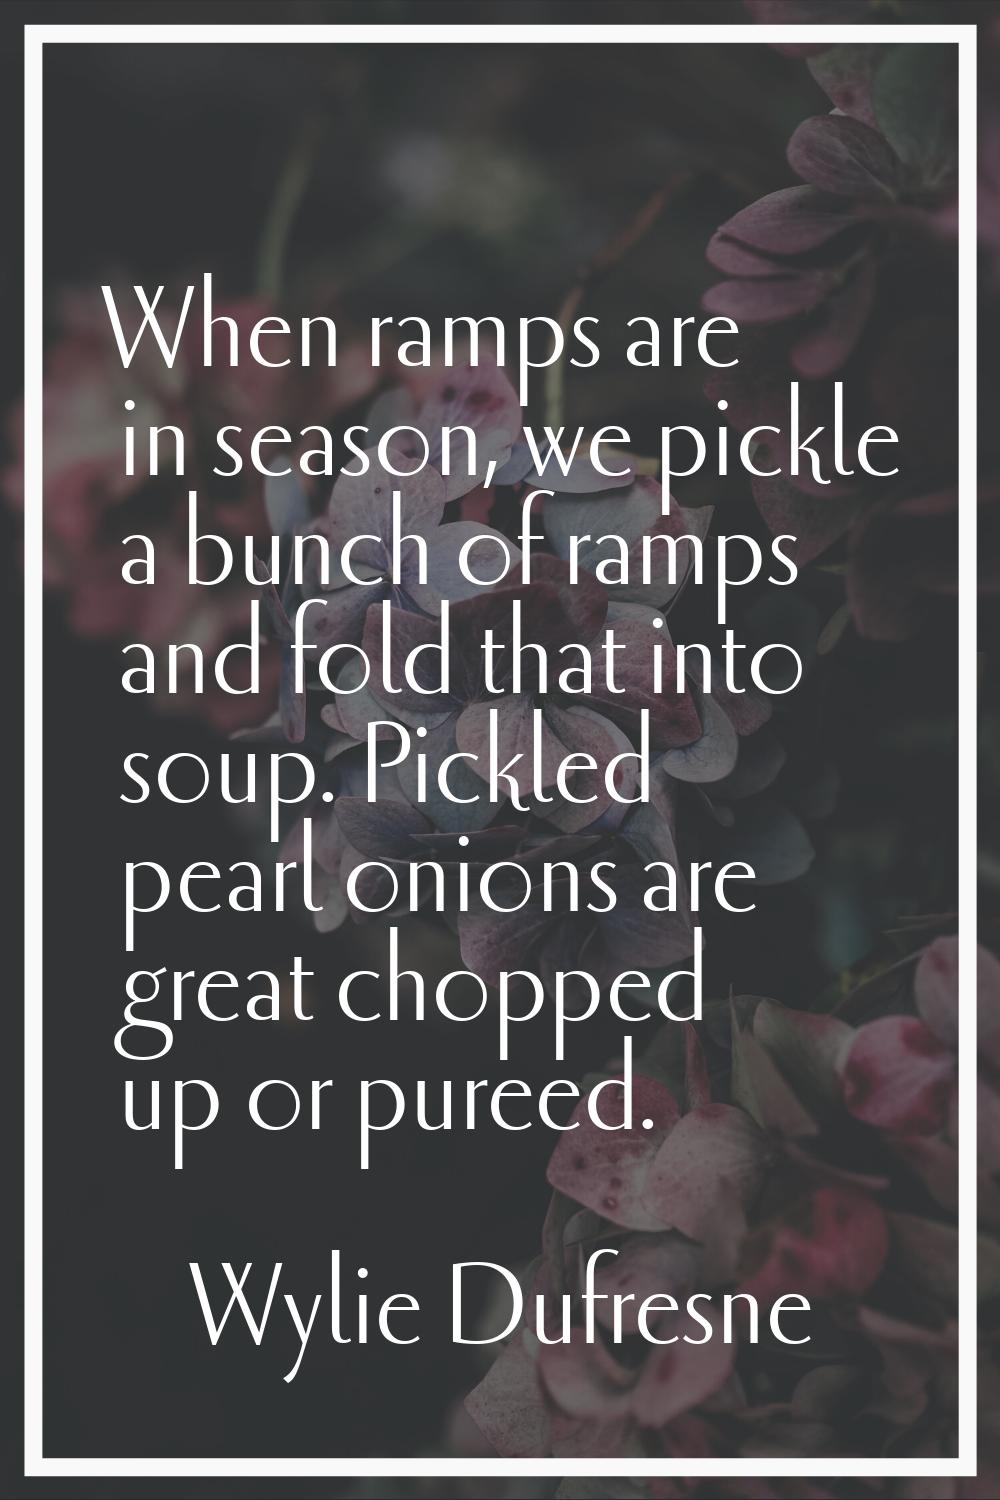 When ramps are in season, we pickle a bunch of ramps and fold that into soup. Pickled pearl onions 